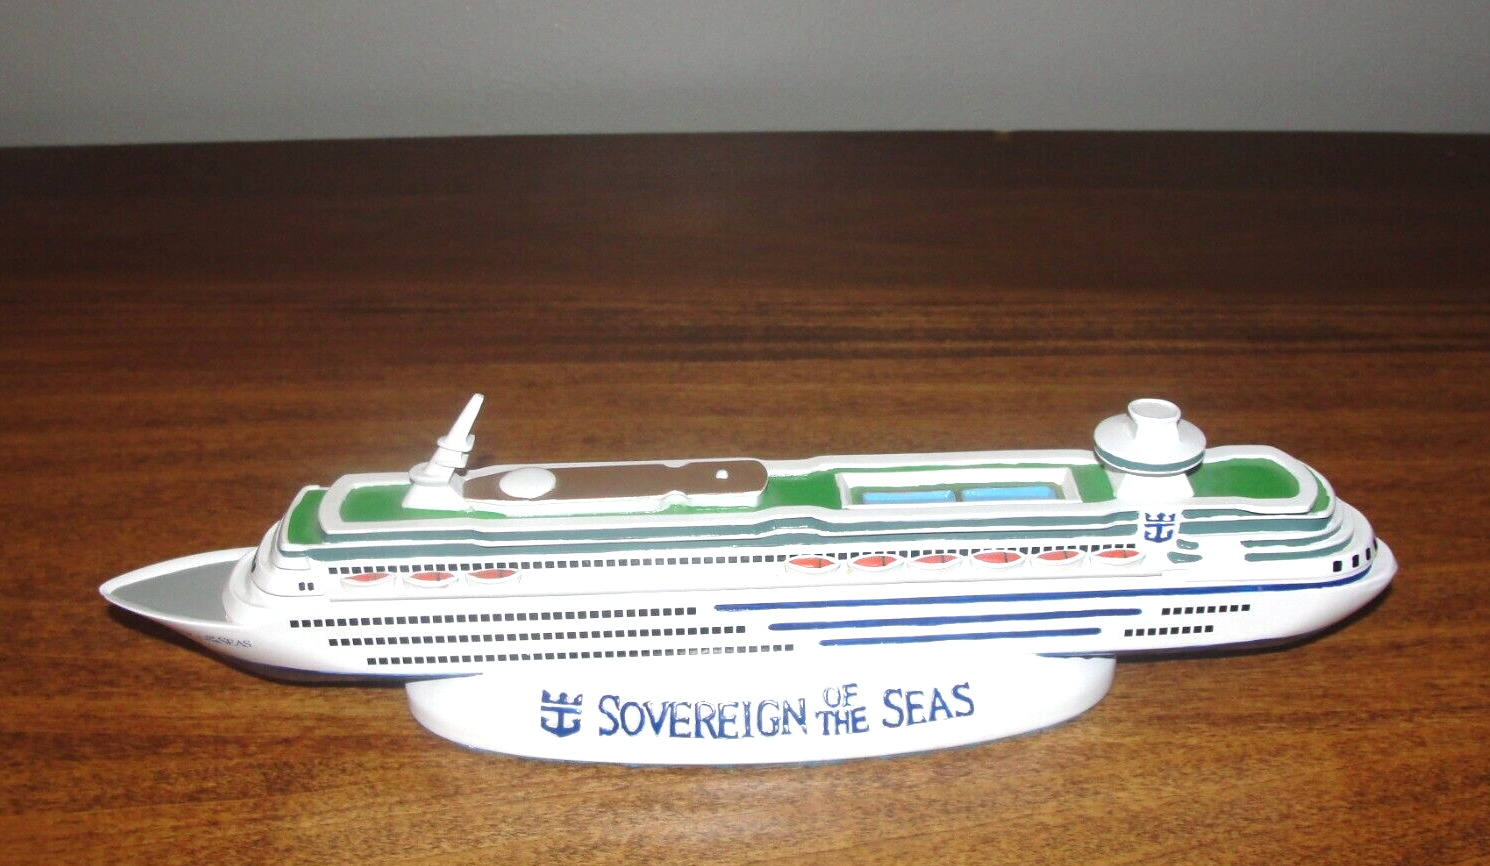 Royal Caribbean cruise ship model Sovereign Of The Seas Official Licensed